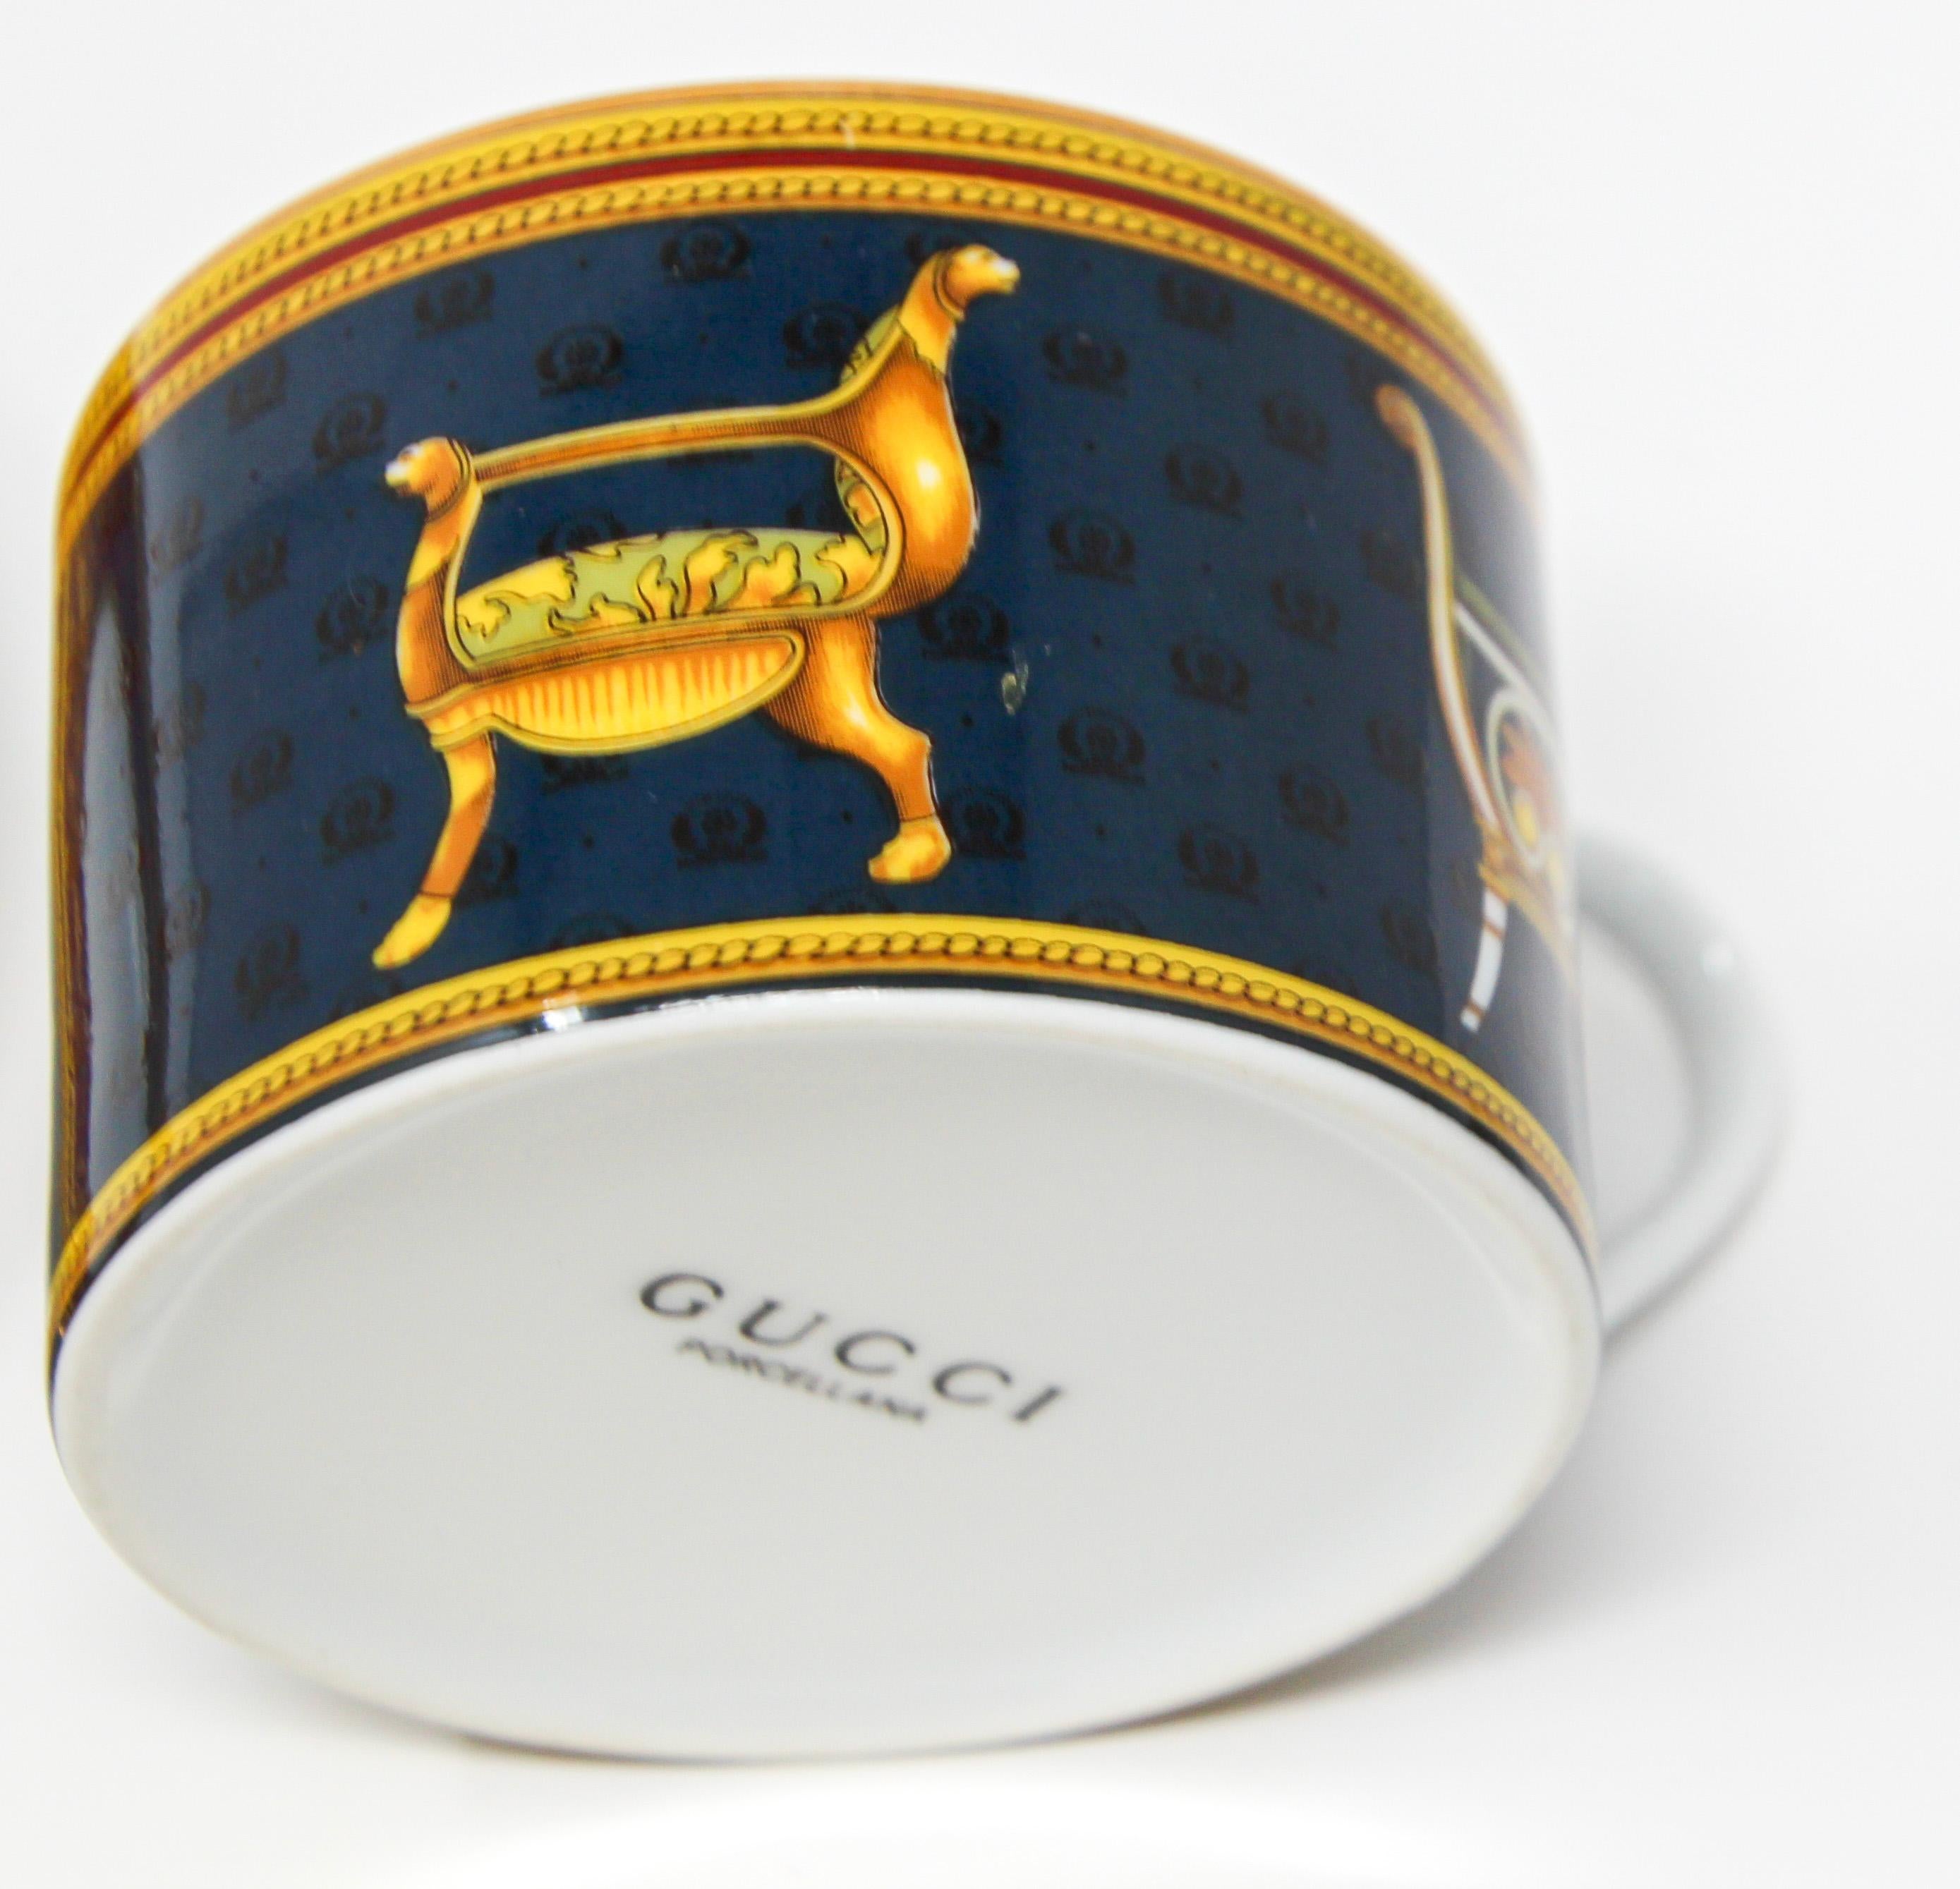 Gucci Porcelain Tea Cups and Saucers Set of 2 4